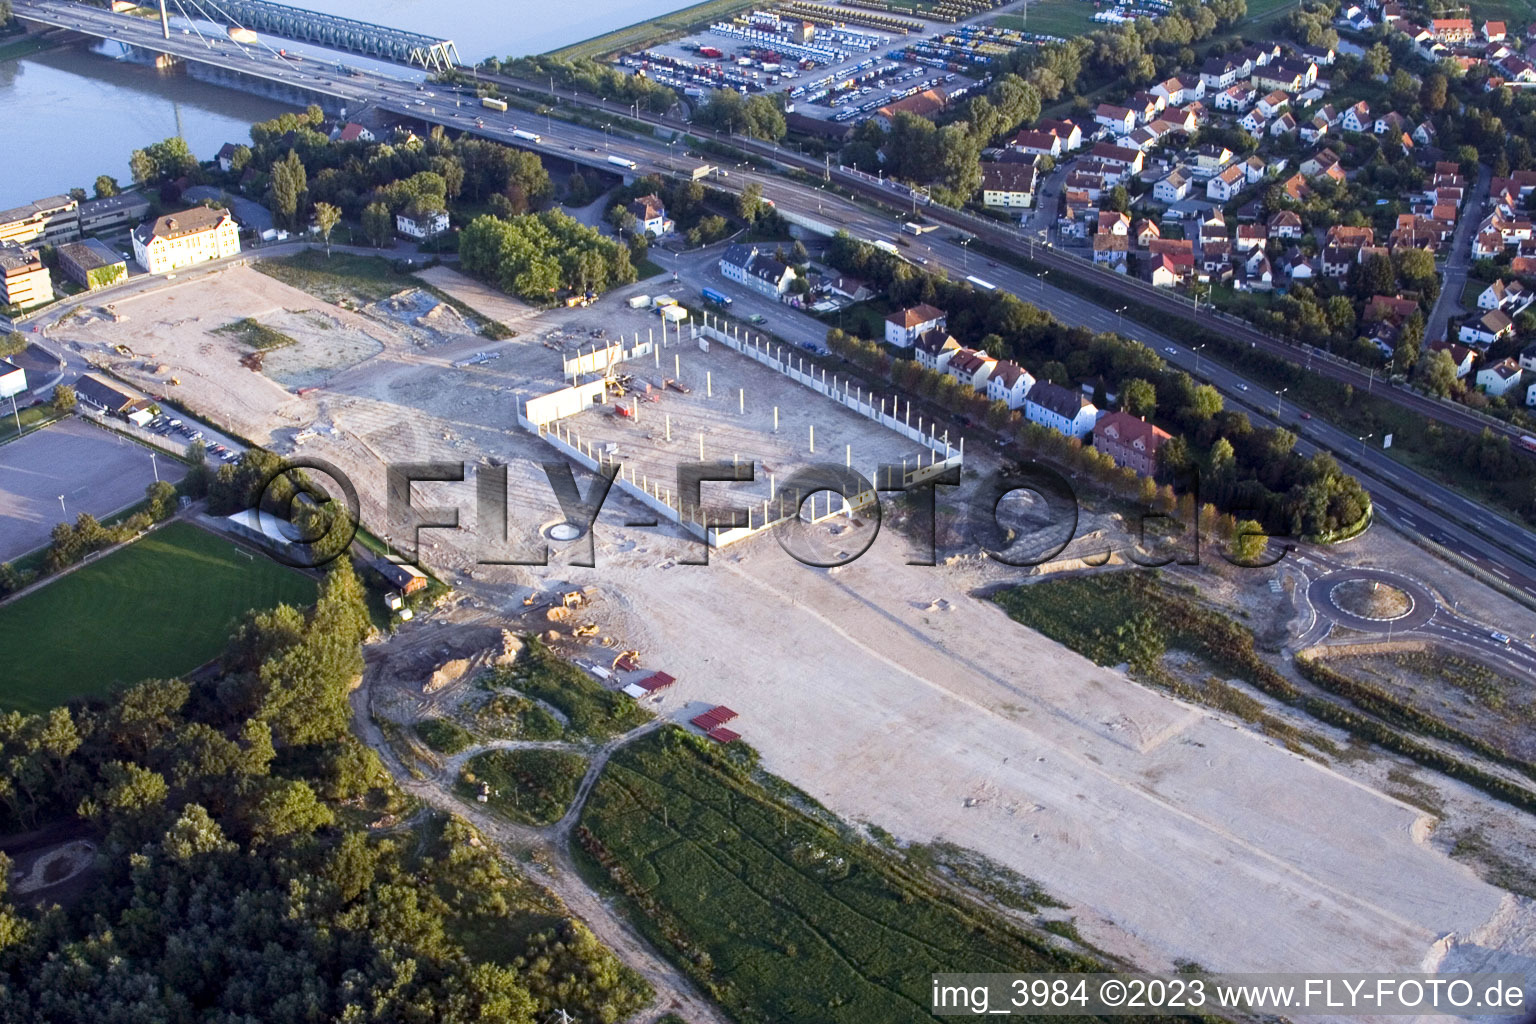 Aerial view of Maximiliancenter retail park in Wörth-Maximiliansau, Globus construction site in the district Maximiliansau in Wörth am Rhein in the state Rhineland-Palatinate, Germany